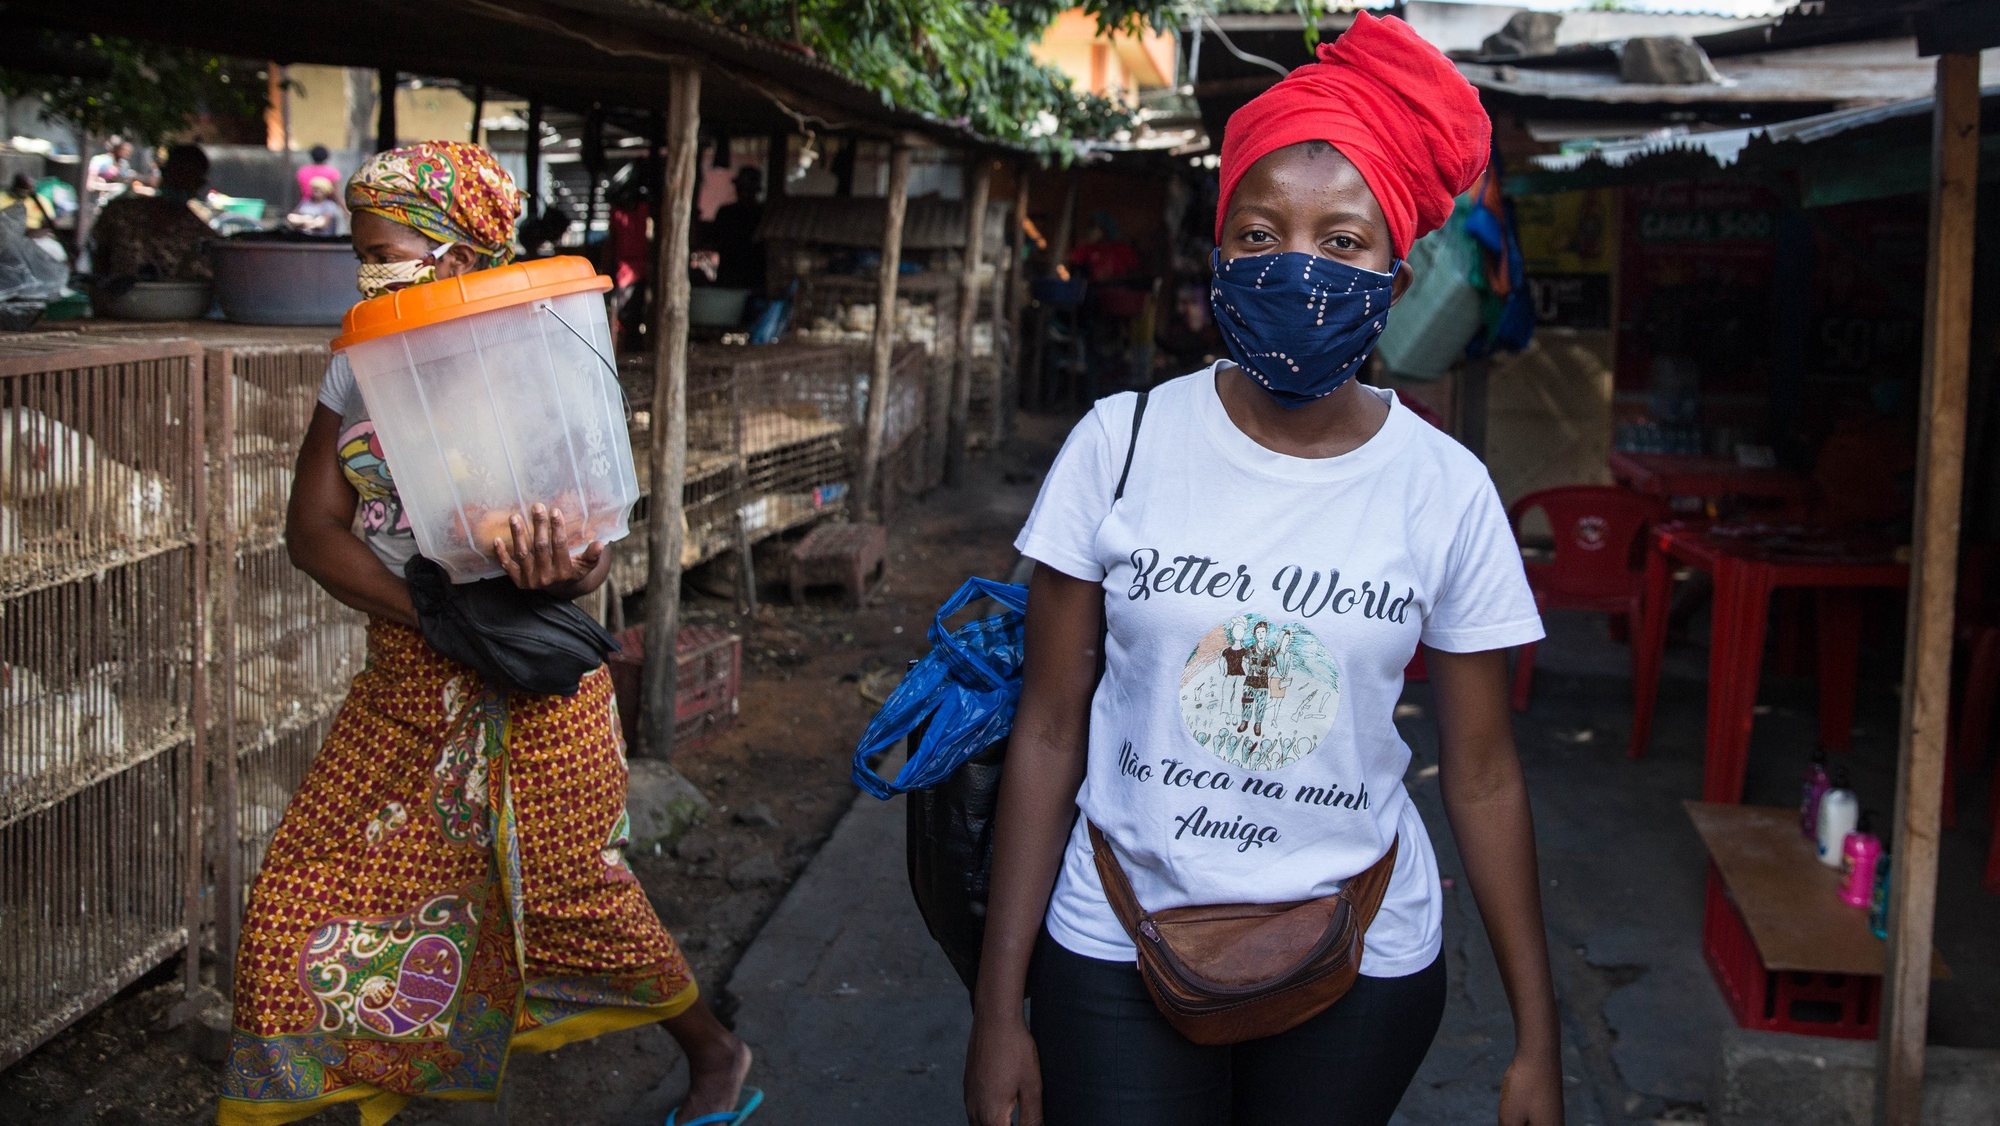 An activist during a daily distribution action of the capulana masks (traditional printed fabric), a result of small donations from local designers, due to the covid-19 pandemic, in Maputo, Mozambique, 22 April 2020 (issued on 27 April 2020). The initiative created by three women activists at the end of last week already had 13 women distributing over a thousand &#039;kits&#039; a day - a set consisting of two masks, one soap, and a pamphlet with instructions from the Ministry of Health illustrating how the masks should be worn. RICARDO FRANCO/LUSA